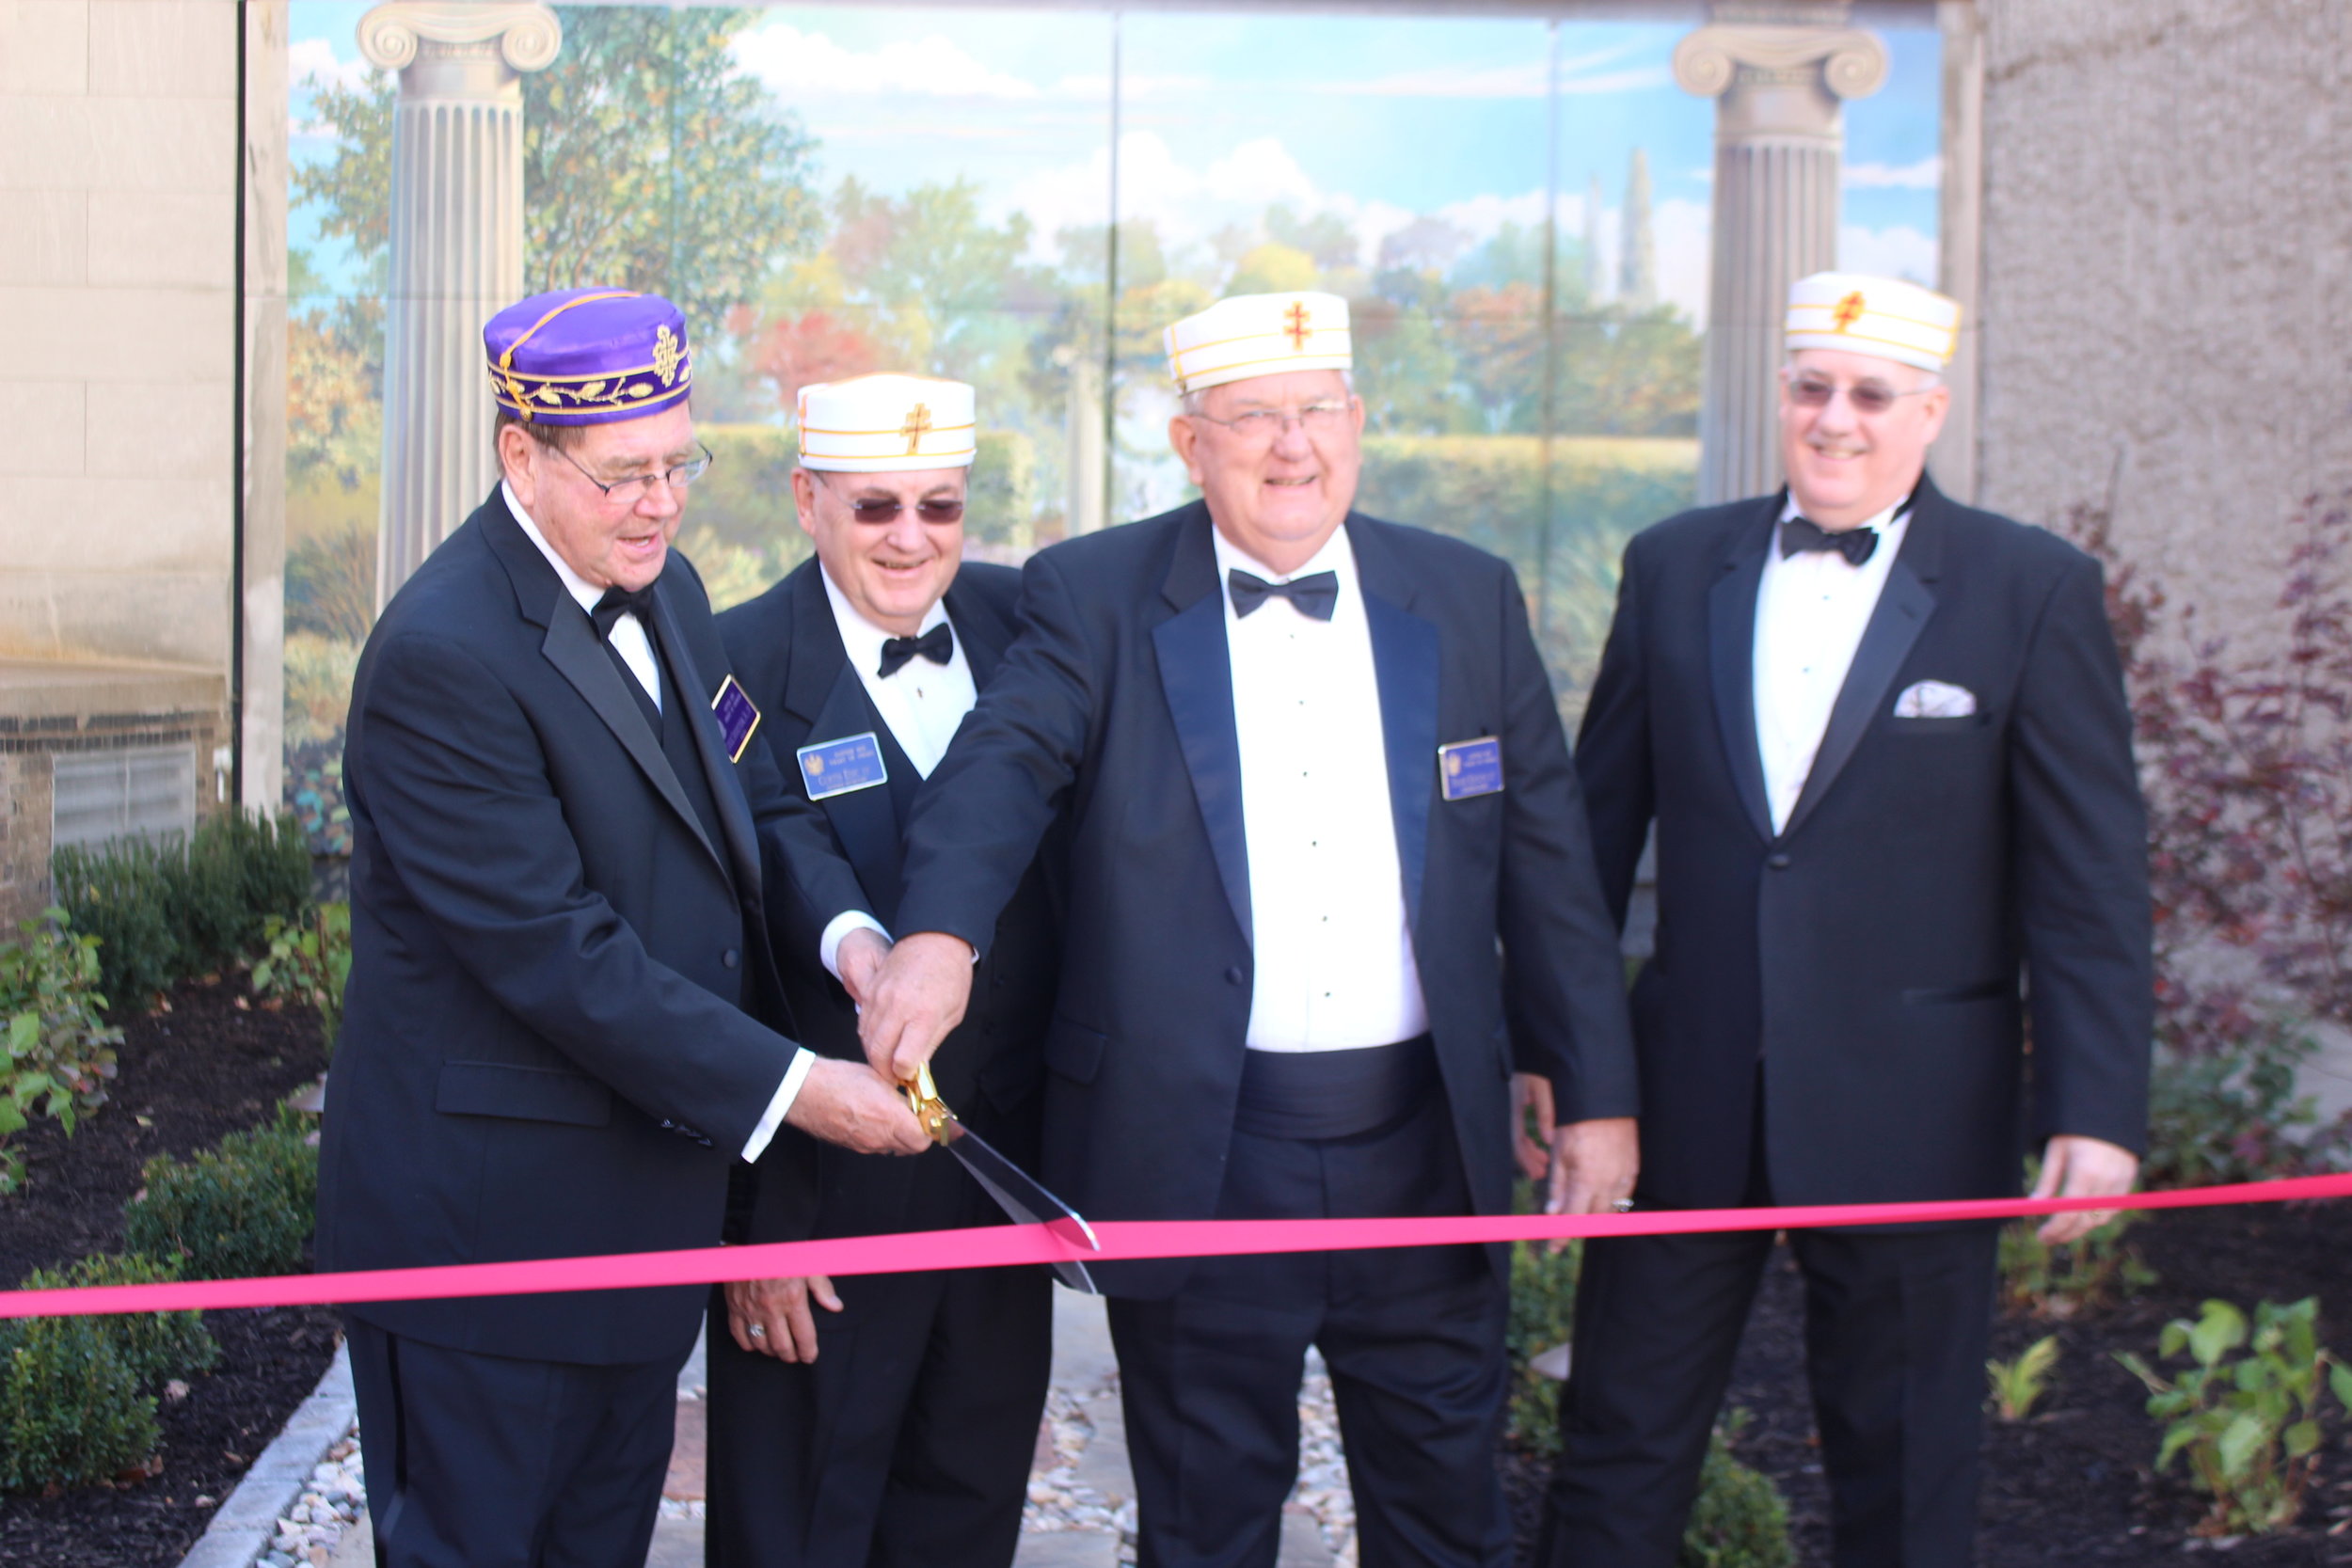  Charles Sederstrom, 33°, SGIG in Nebraska, with Curt Edic, 33°, General Secretary, Frank Kroupa, 33°, President of the Omaha Valley Cathedral Board, and Paul Rutherford, 33°, Personal Representative to the SGIG dedicate the Scottish Rite Mural and G